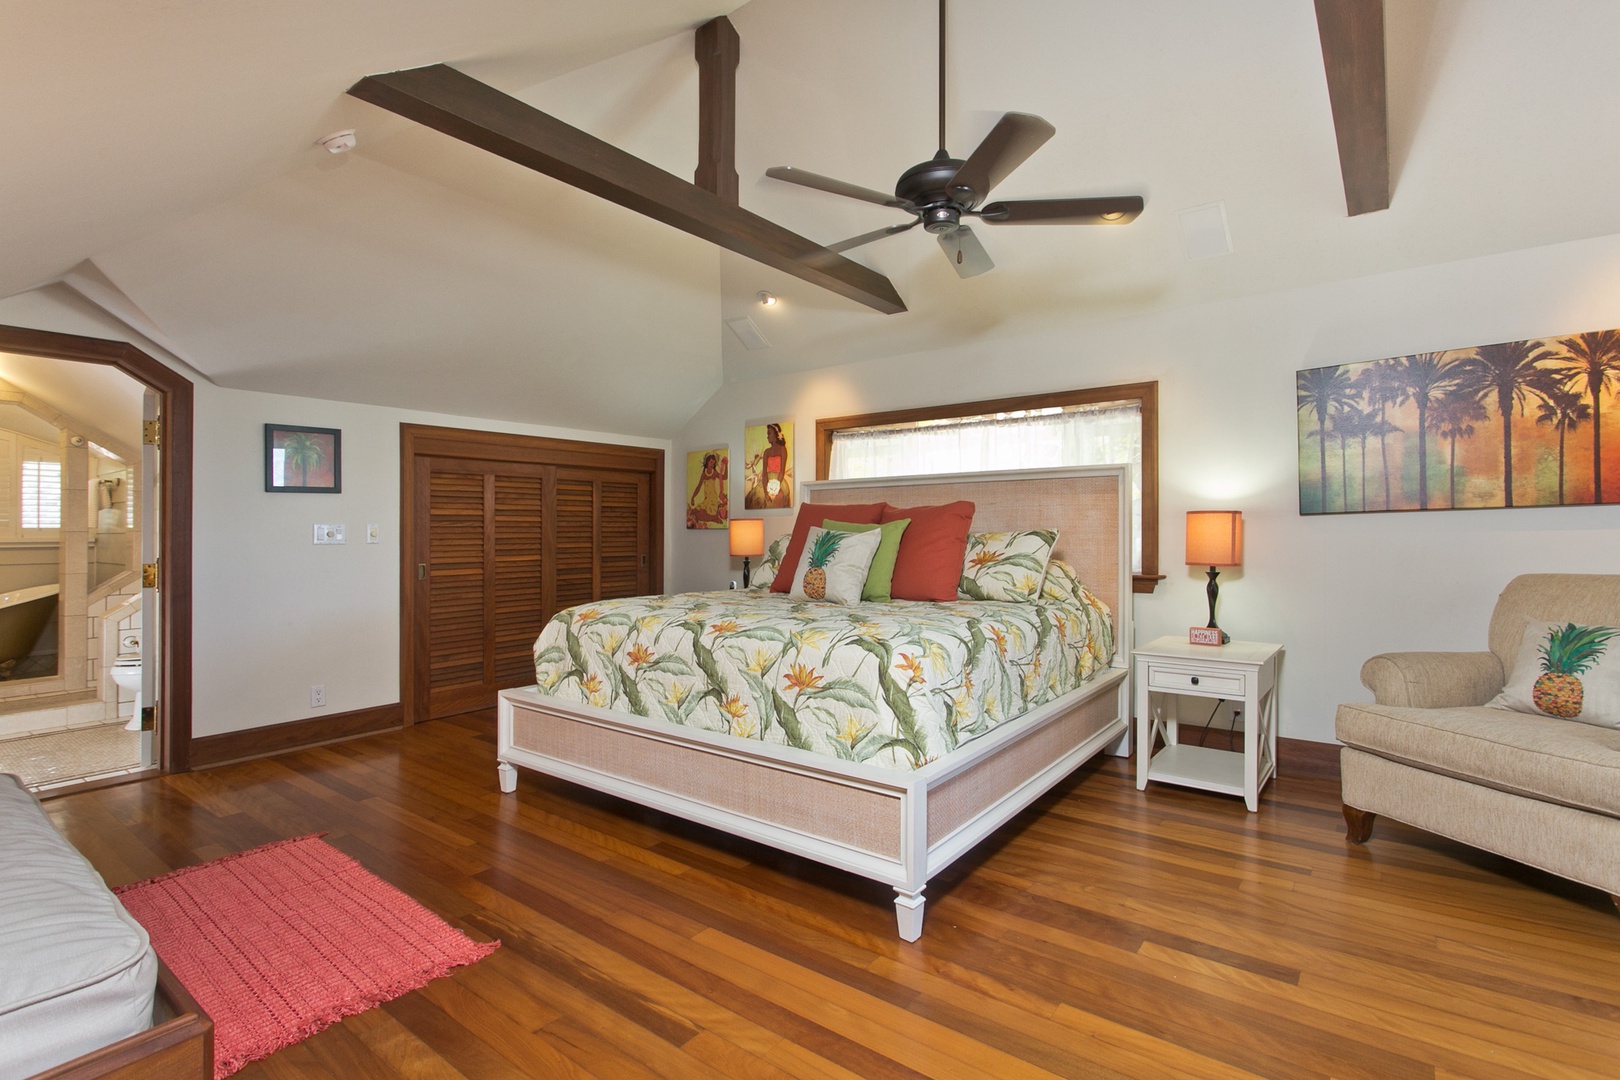 Kailua Vacation Rentals, Hale Melia* - Bedroom with vaulted ceiling and fandelier